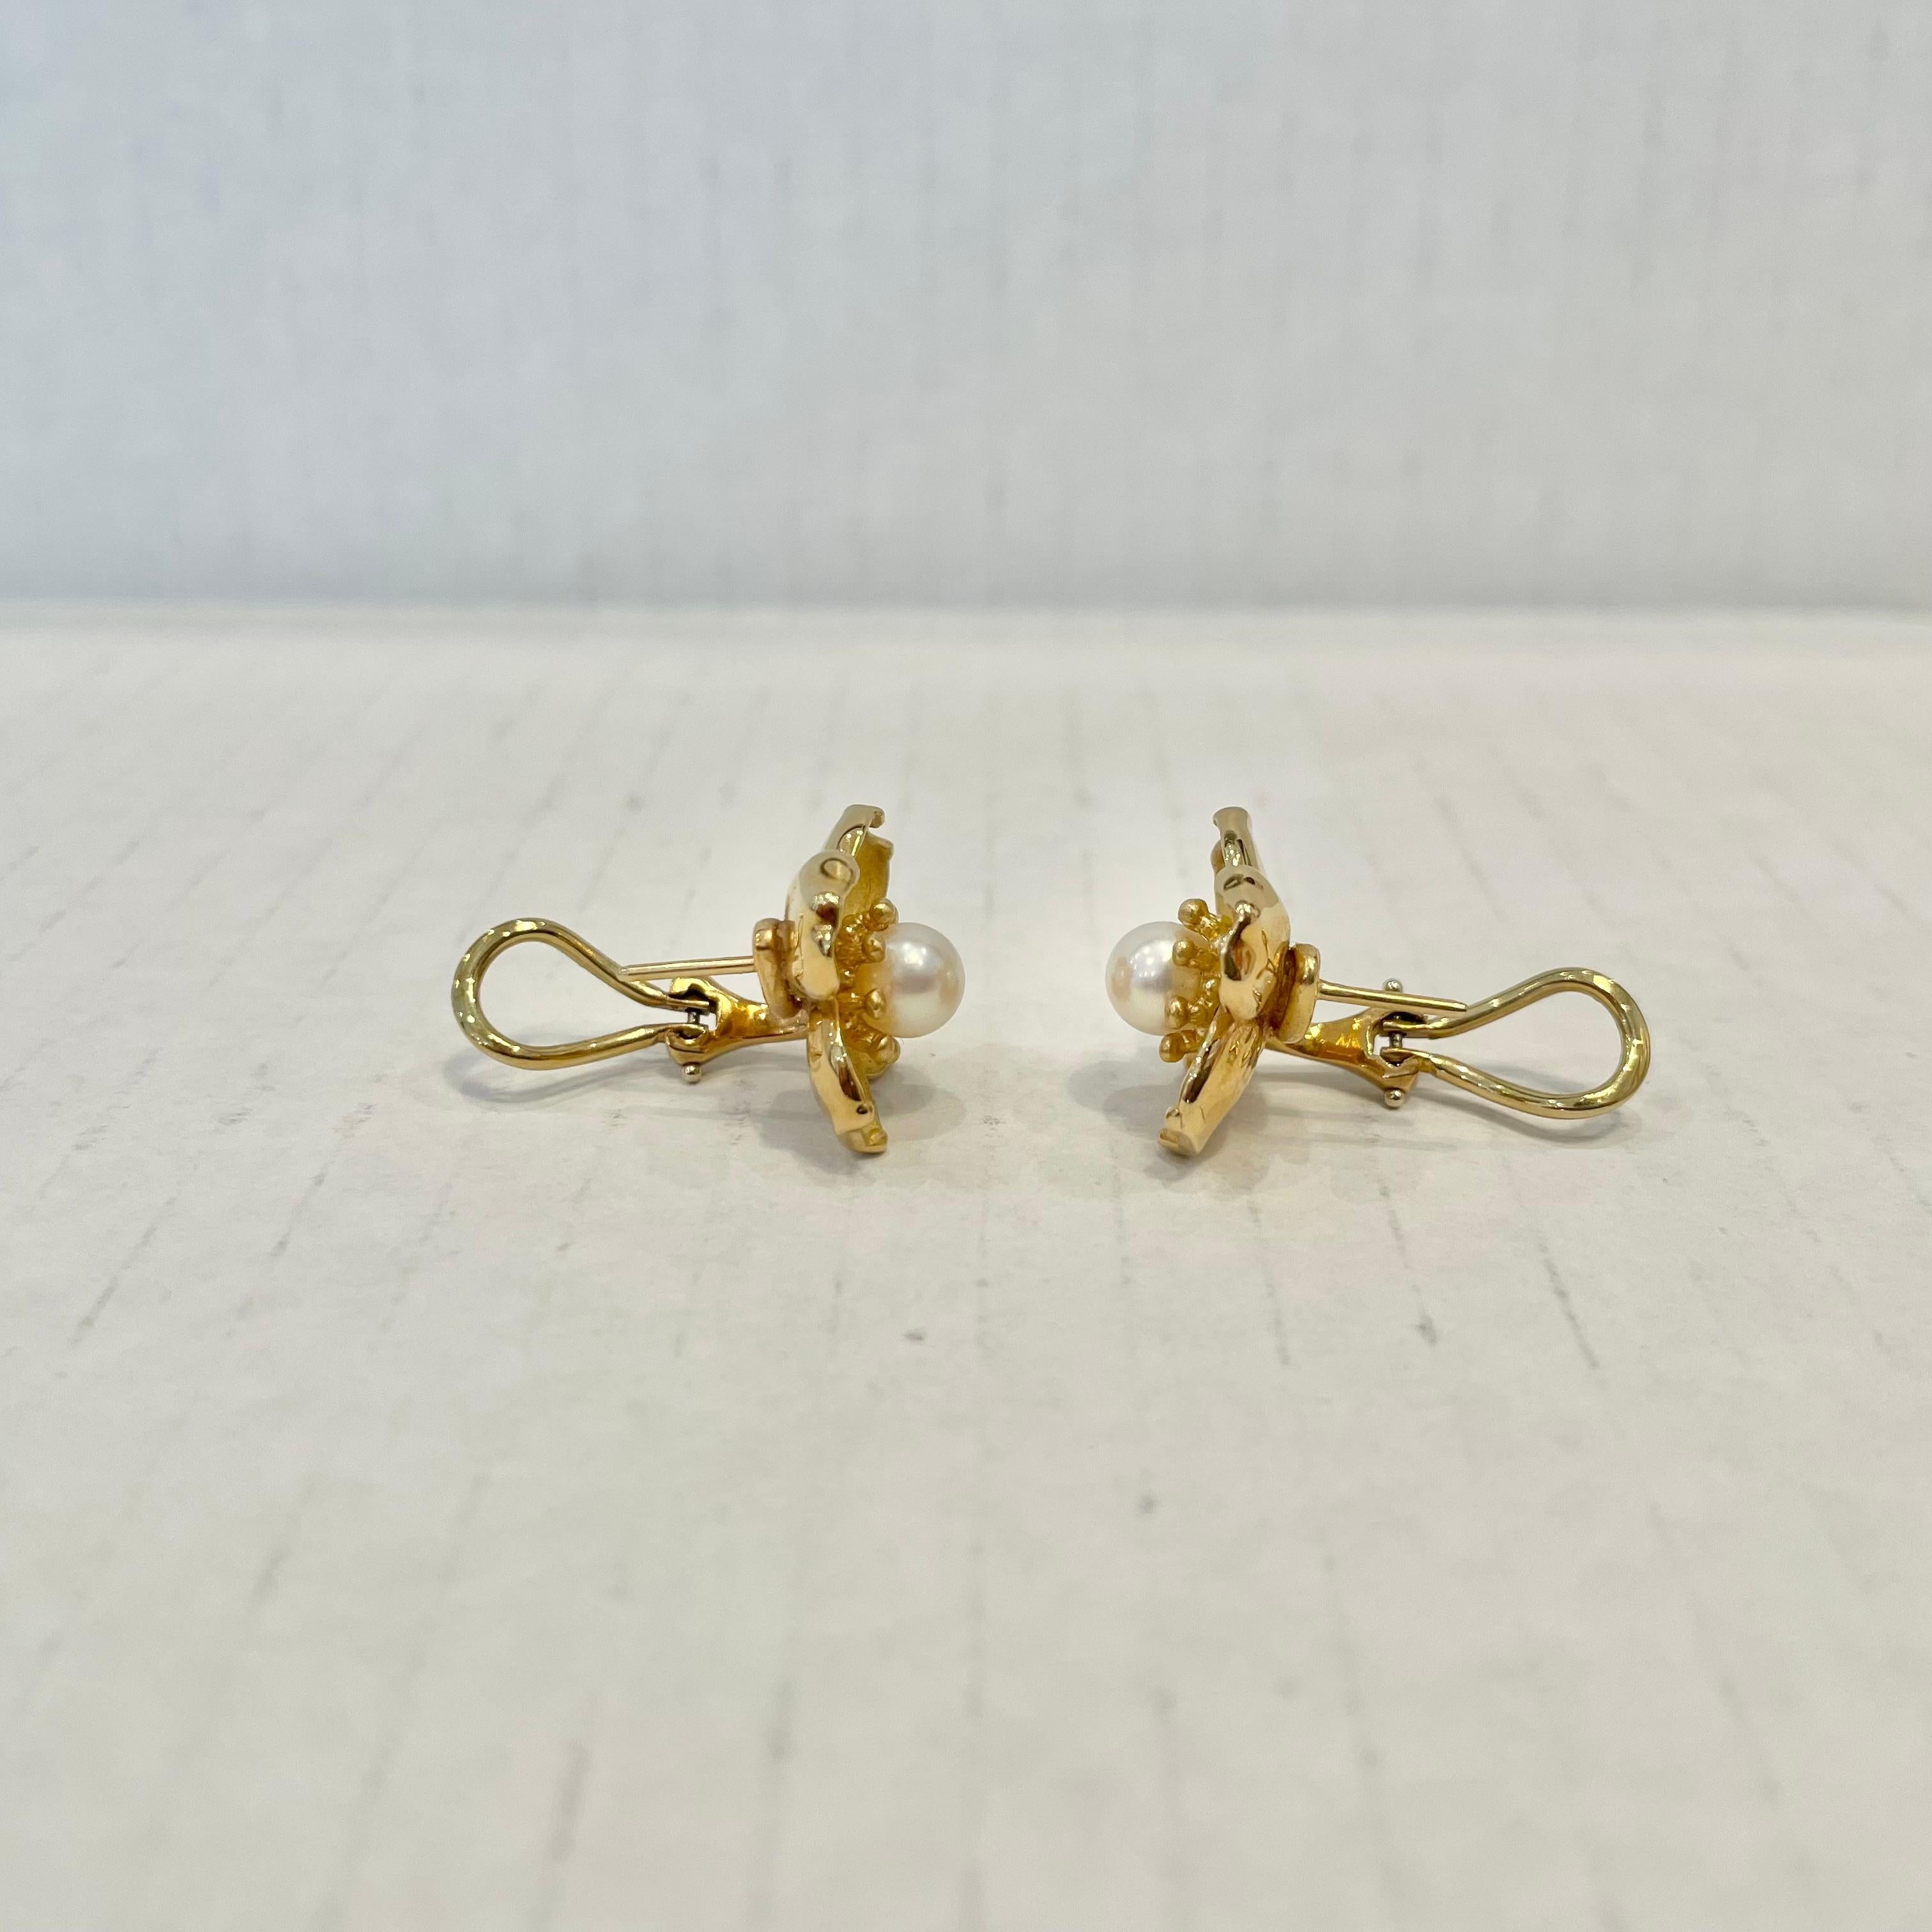 Tiffany & Co. Dogwood & Pearl Earrings in 18 Karat Yellow Gold In Good Condition For Sale In Los Angeles, CA